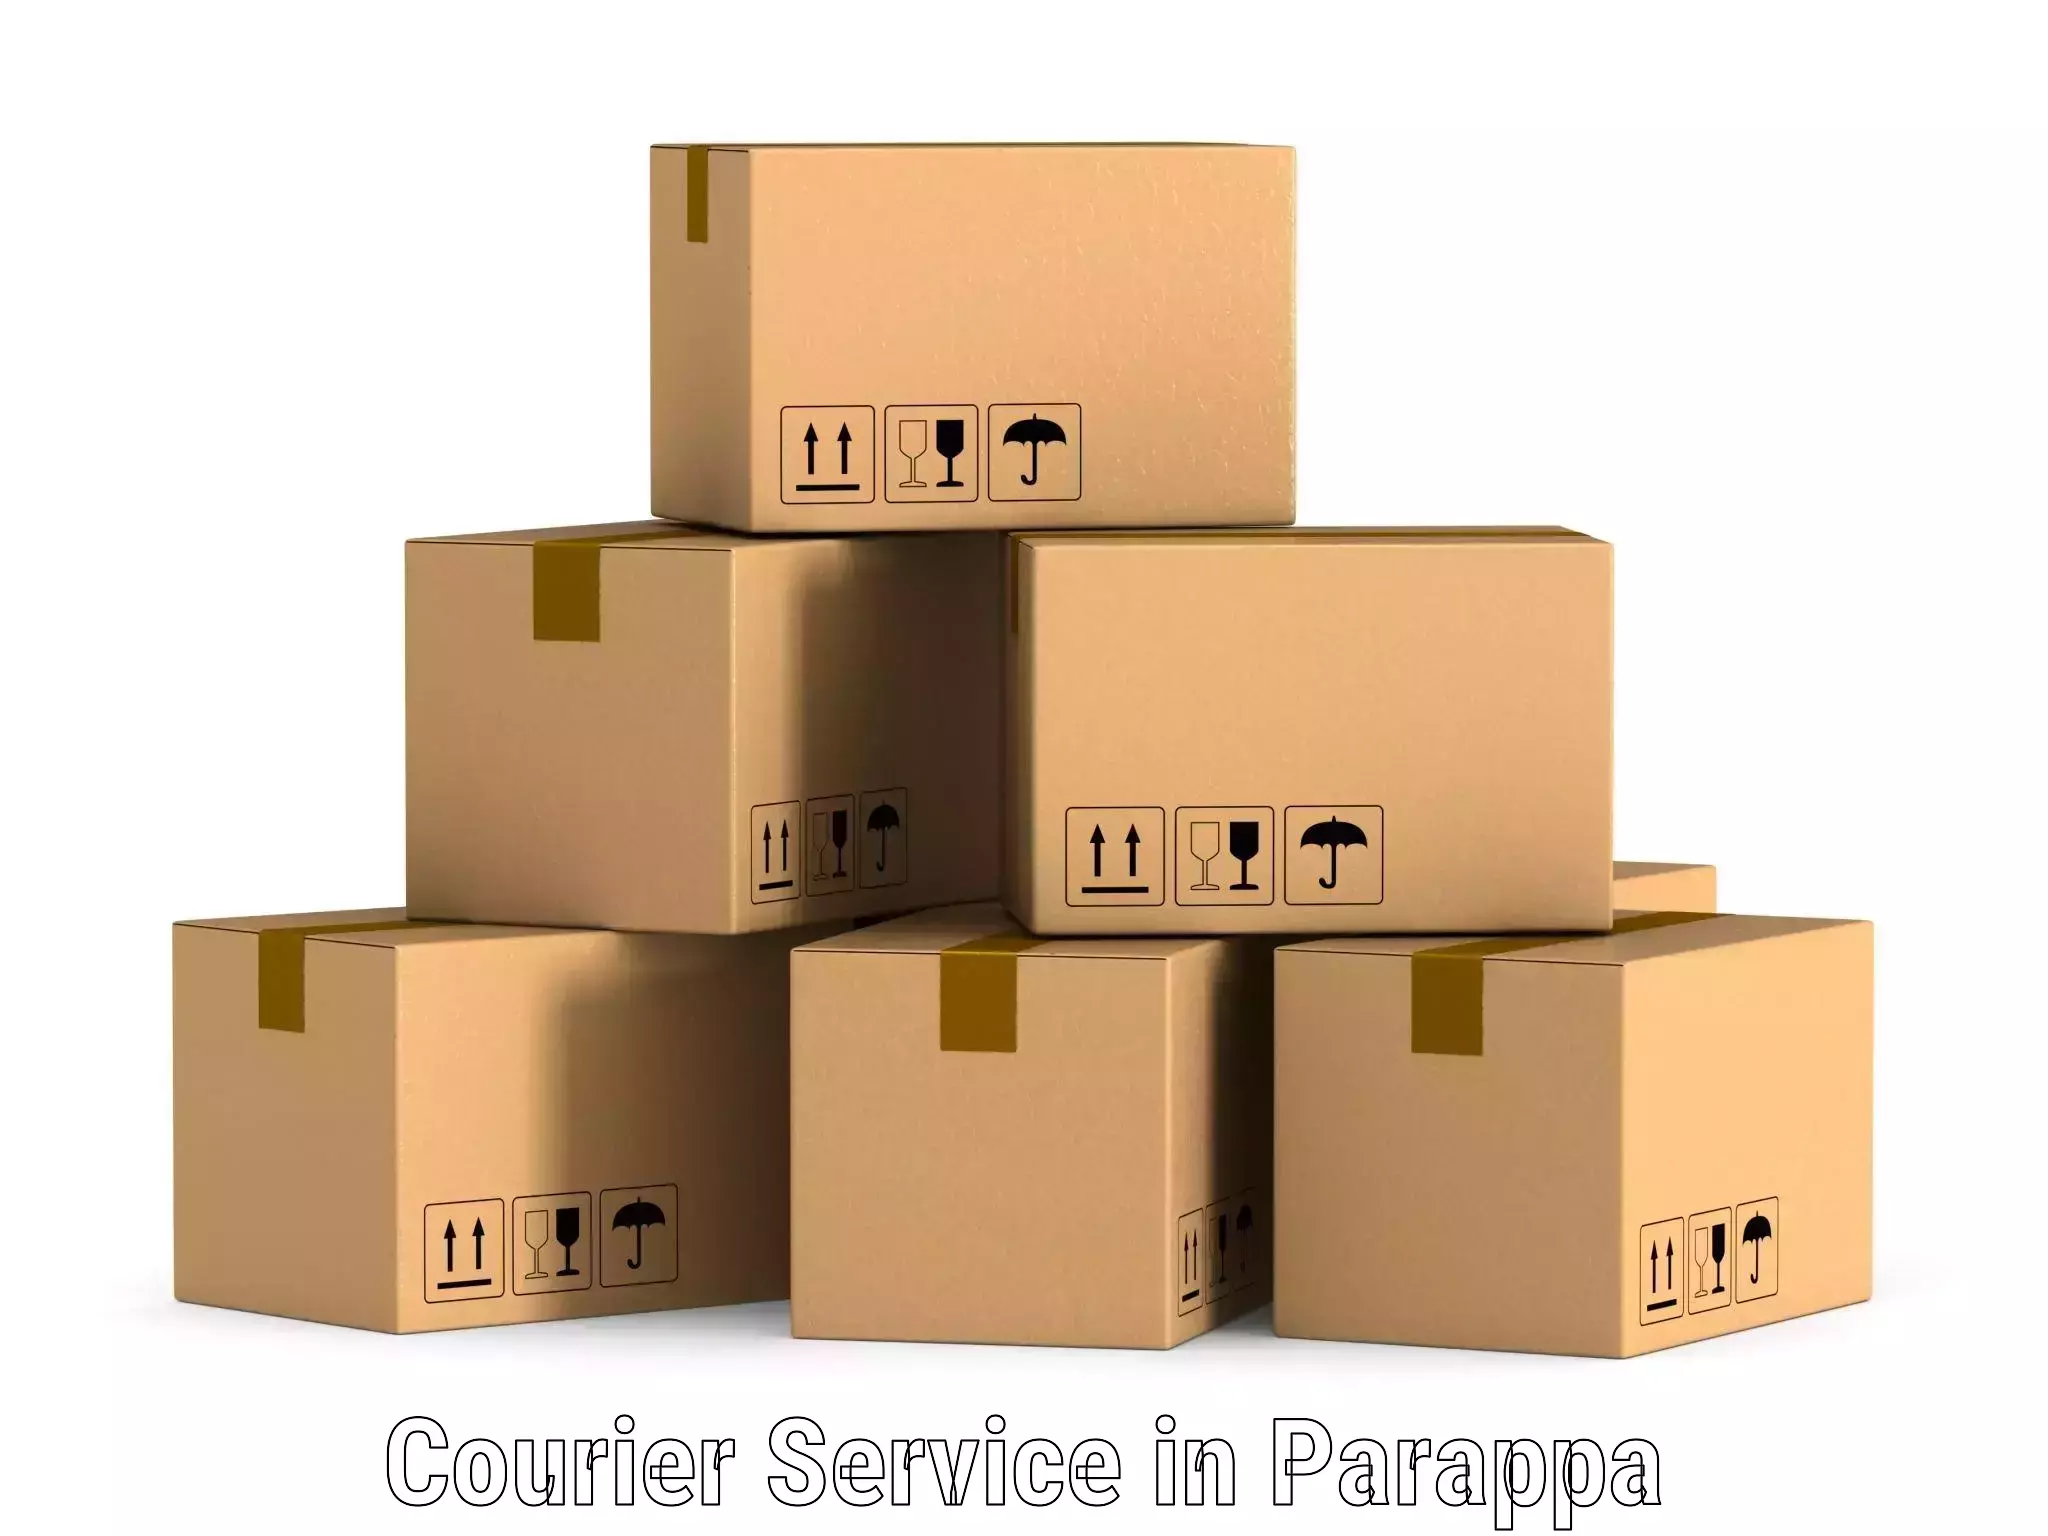 Bulk courier orders in Parappa